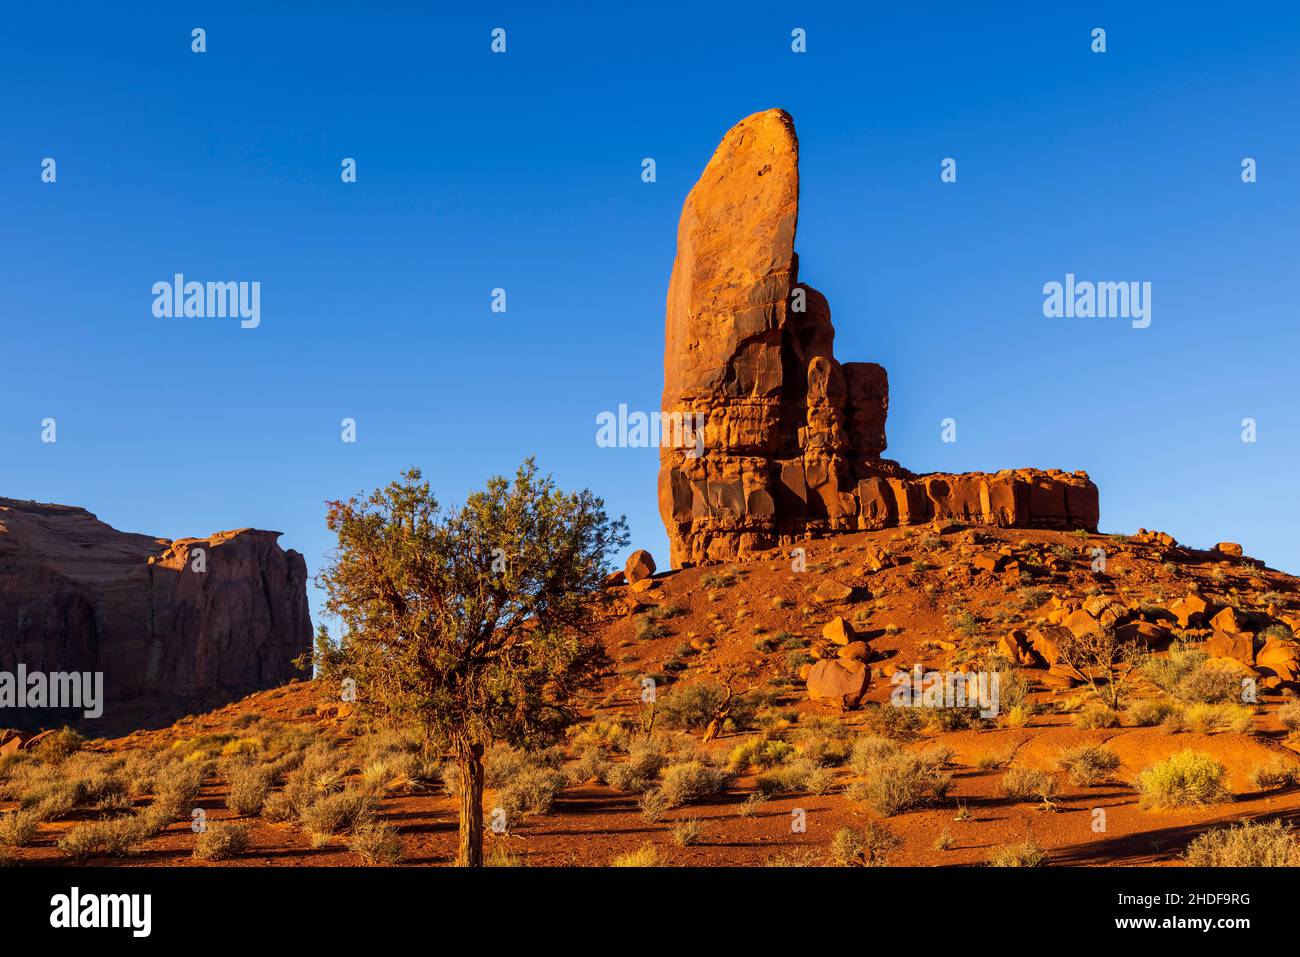 The Thumb rock formation in Monument Valley Navajo Tribal Park, Utah Stock Photo